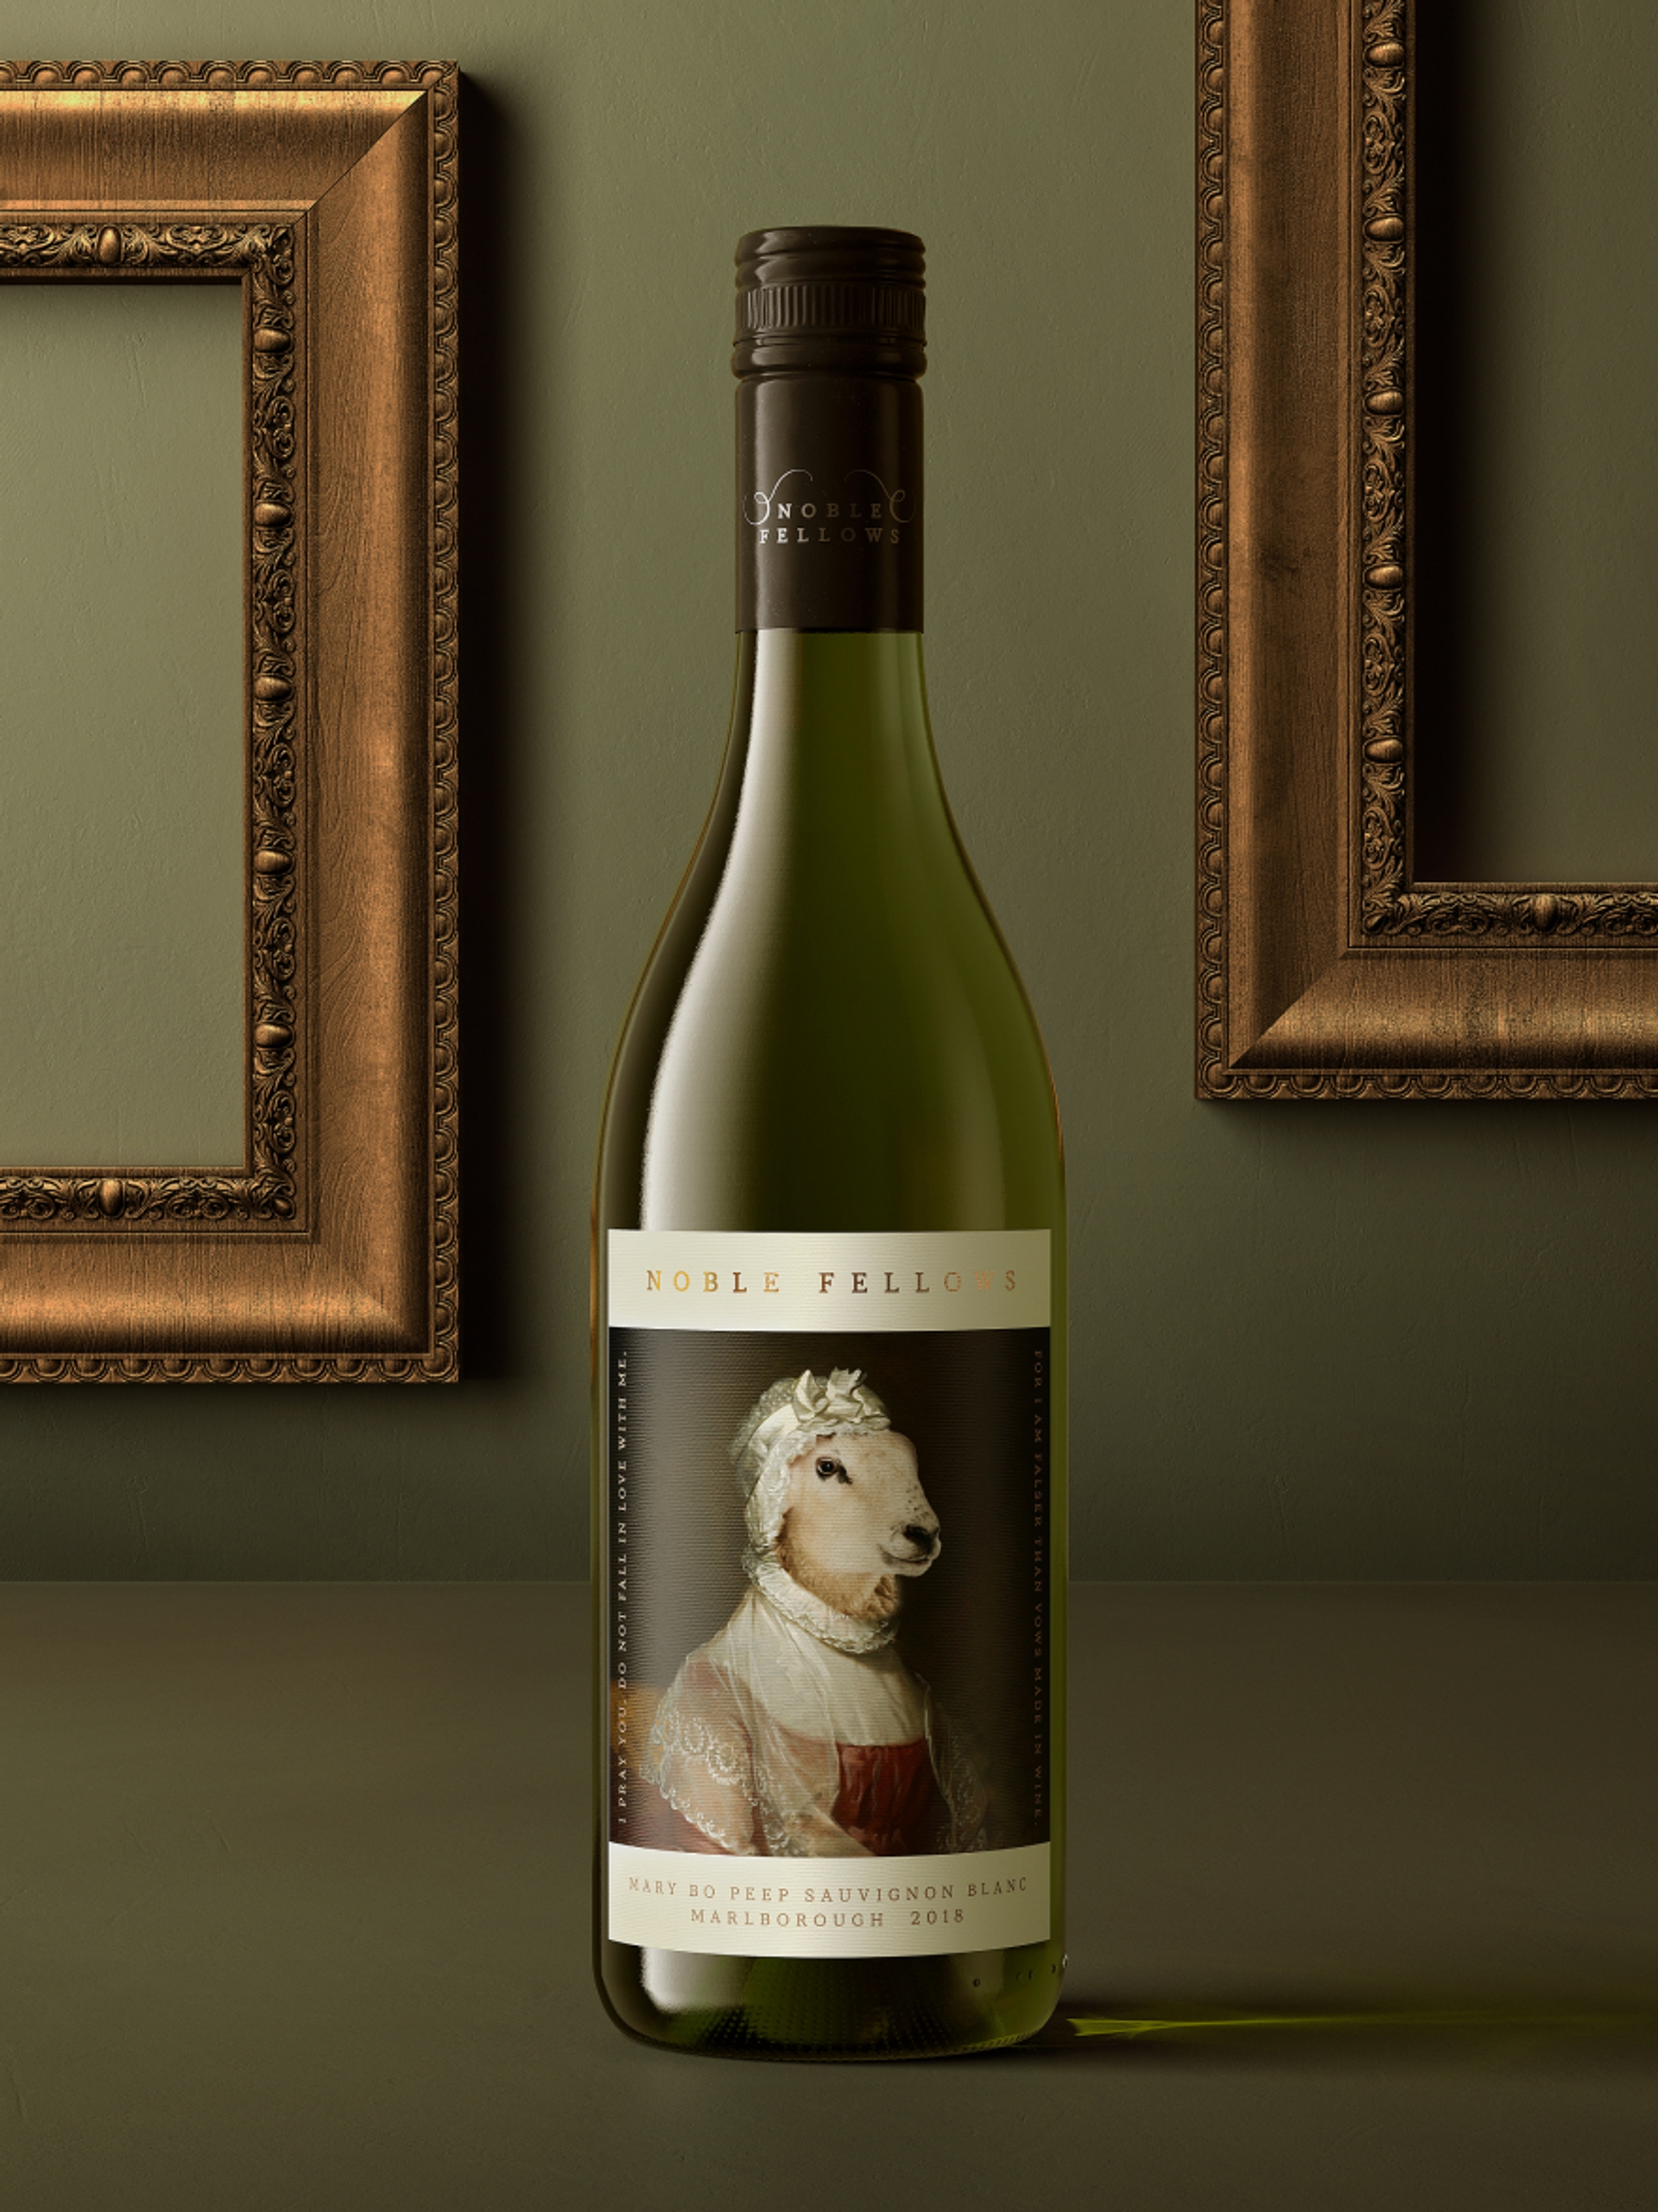 A bottle of Noble Fellows “Mary Bo Peep Sauvignon Blanc”, wine packaging design by Our Revolution in front of two embellished copper frames on a dark green wall Jen Doran